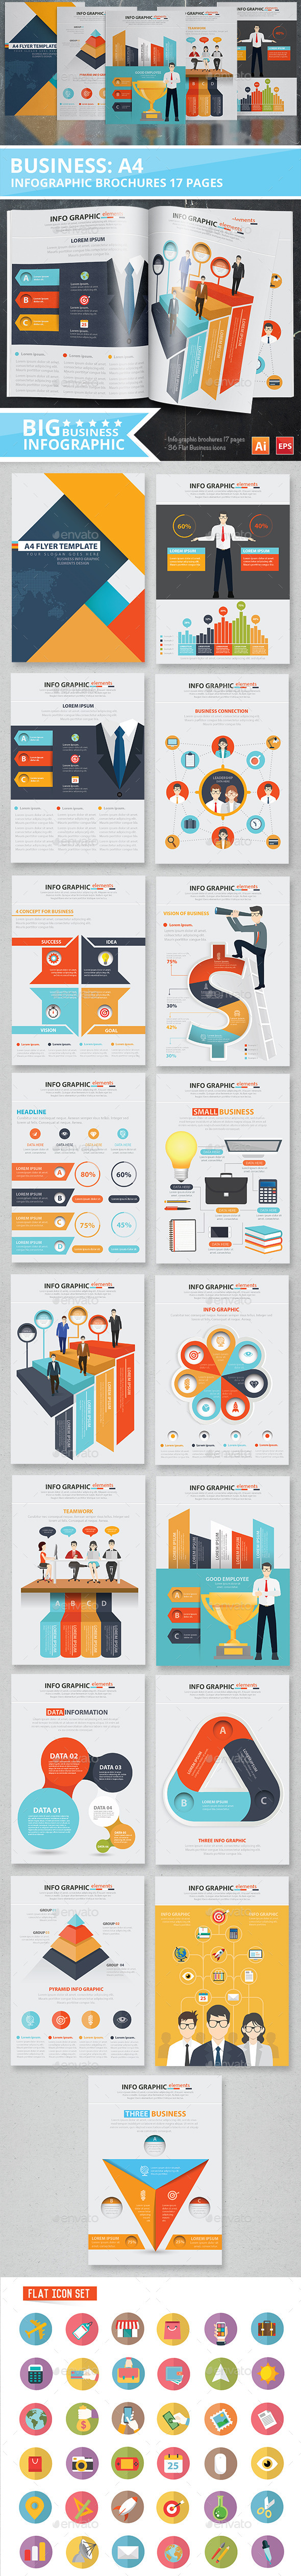 Business Infographic Design 17 Pages